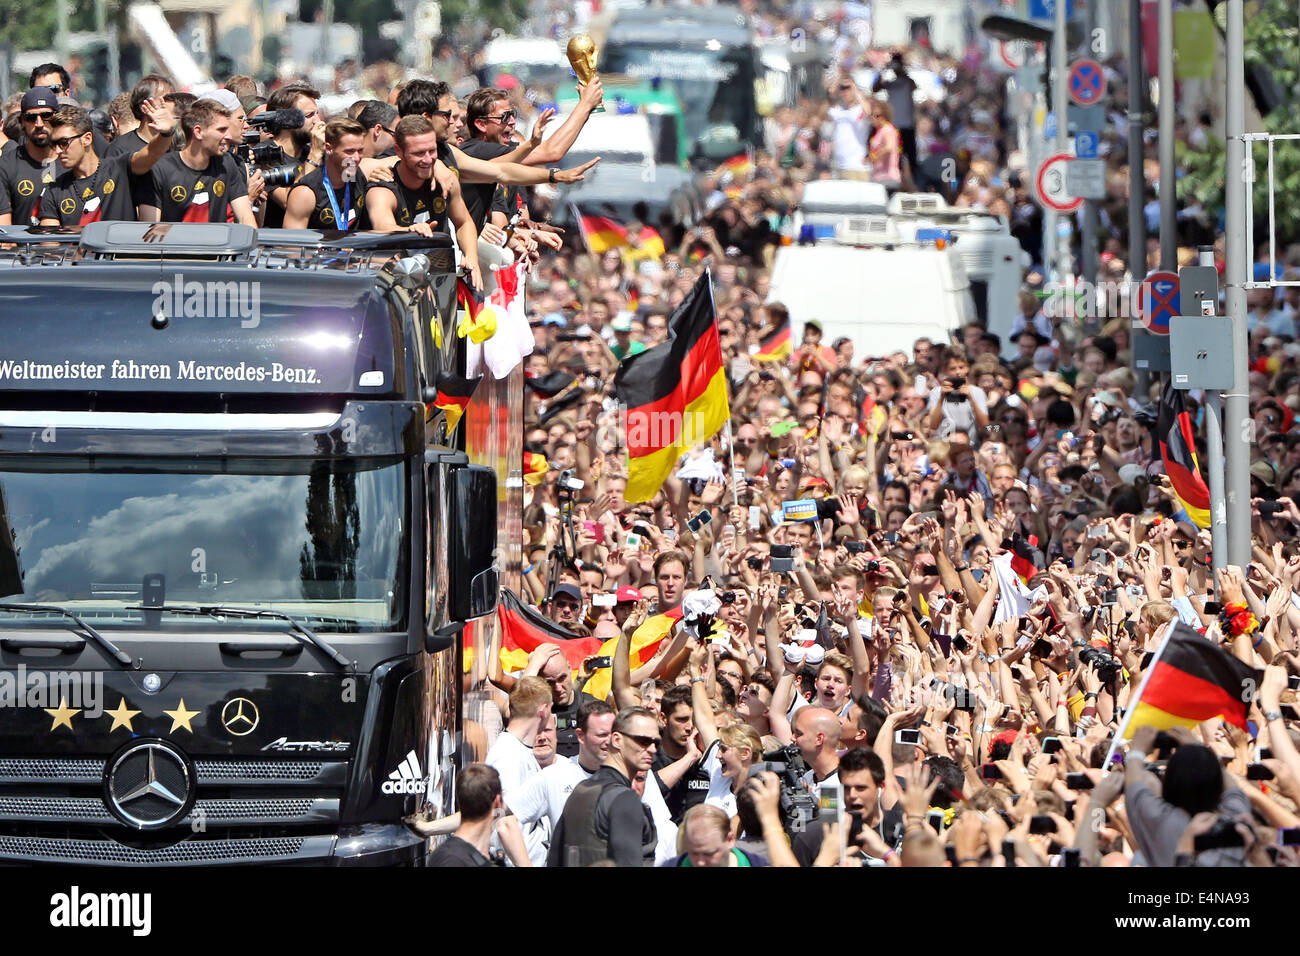 Berlin, Germany. 15th July, 2014. The German national soccer team is celebrated by fans during their drive to Brandenburg Gate in Berlin, Germany, 15 July 2014. The German team on 13 July 2014 had won the Brazil 2014 FIFA Soccer World Cup final against Argentina by 1-0 to win the title for the fourth time after 1954, 1974 and 1990. Photo: JAN WOITAS/DPA/Alamy Live News Stock Photo